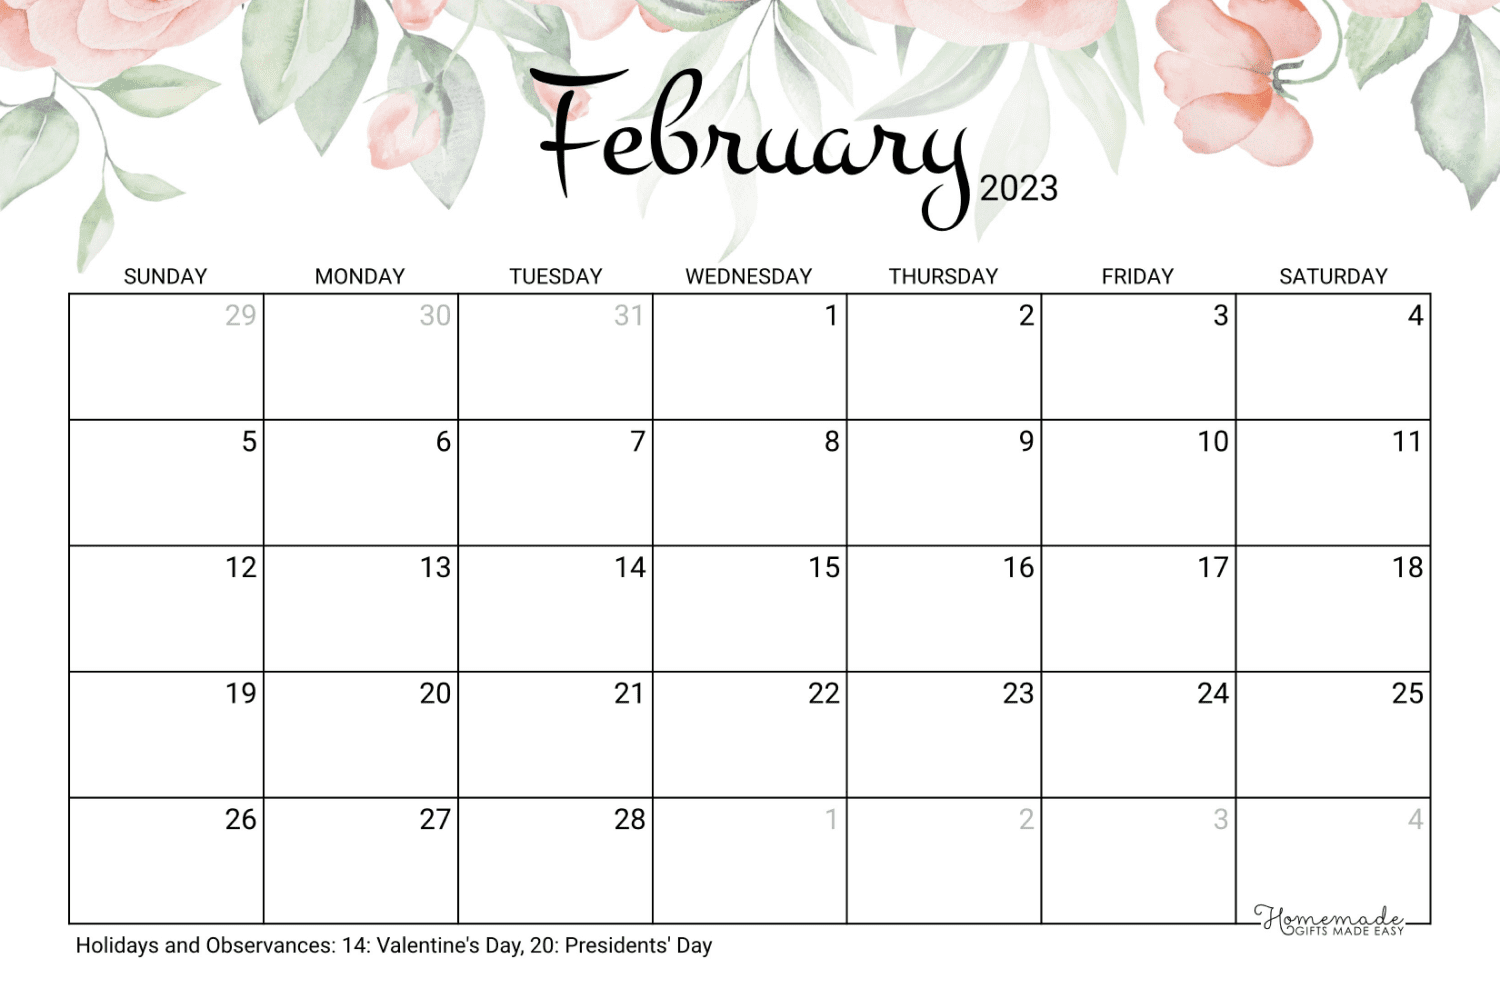 February calendar with watercolor flowers on top and listing national holidays.